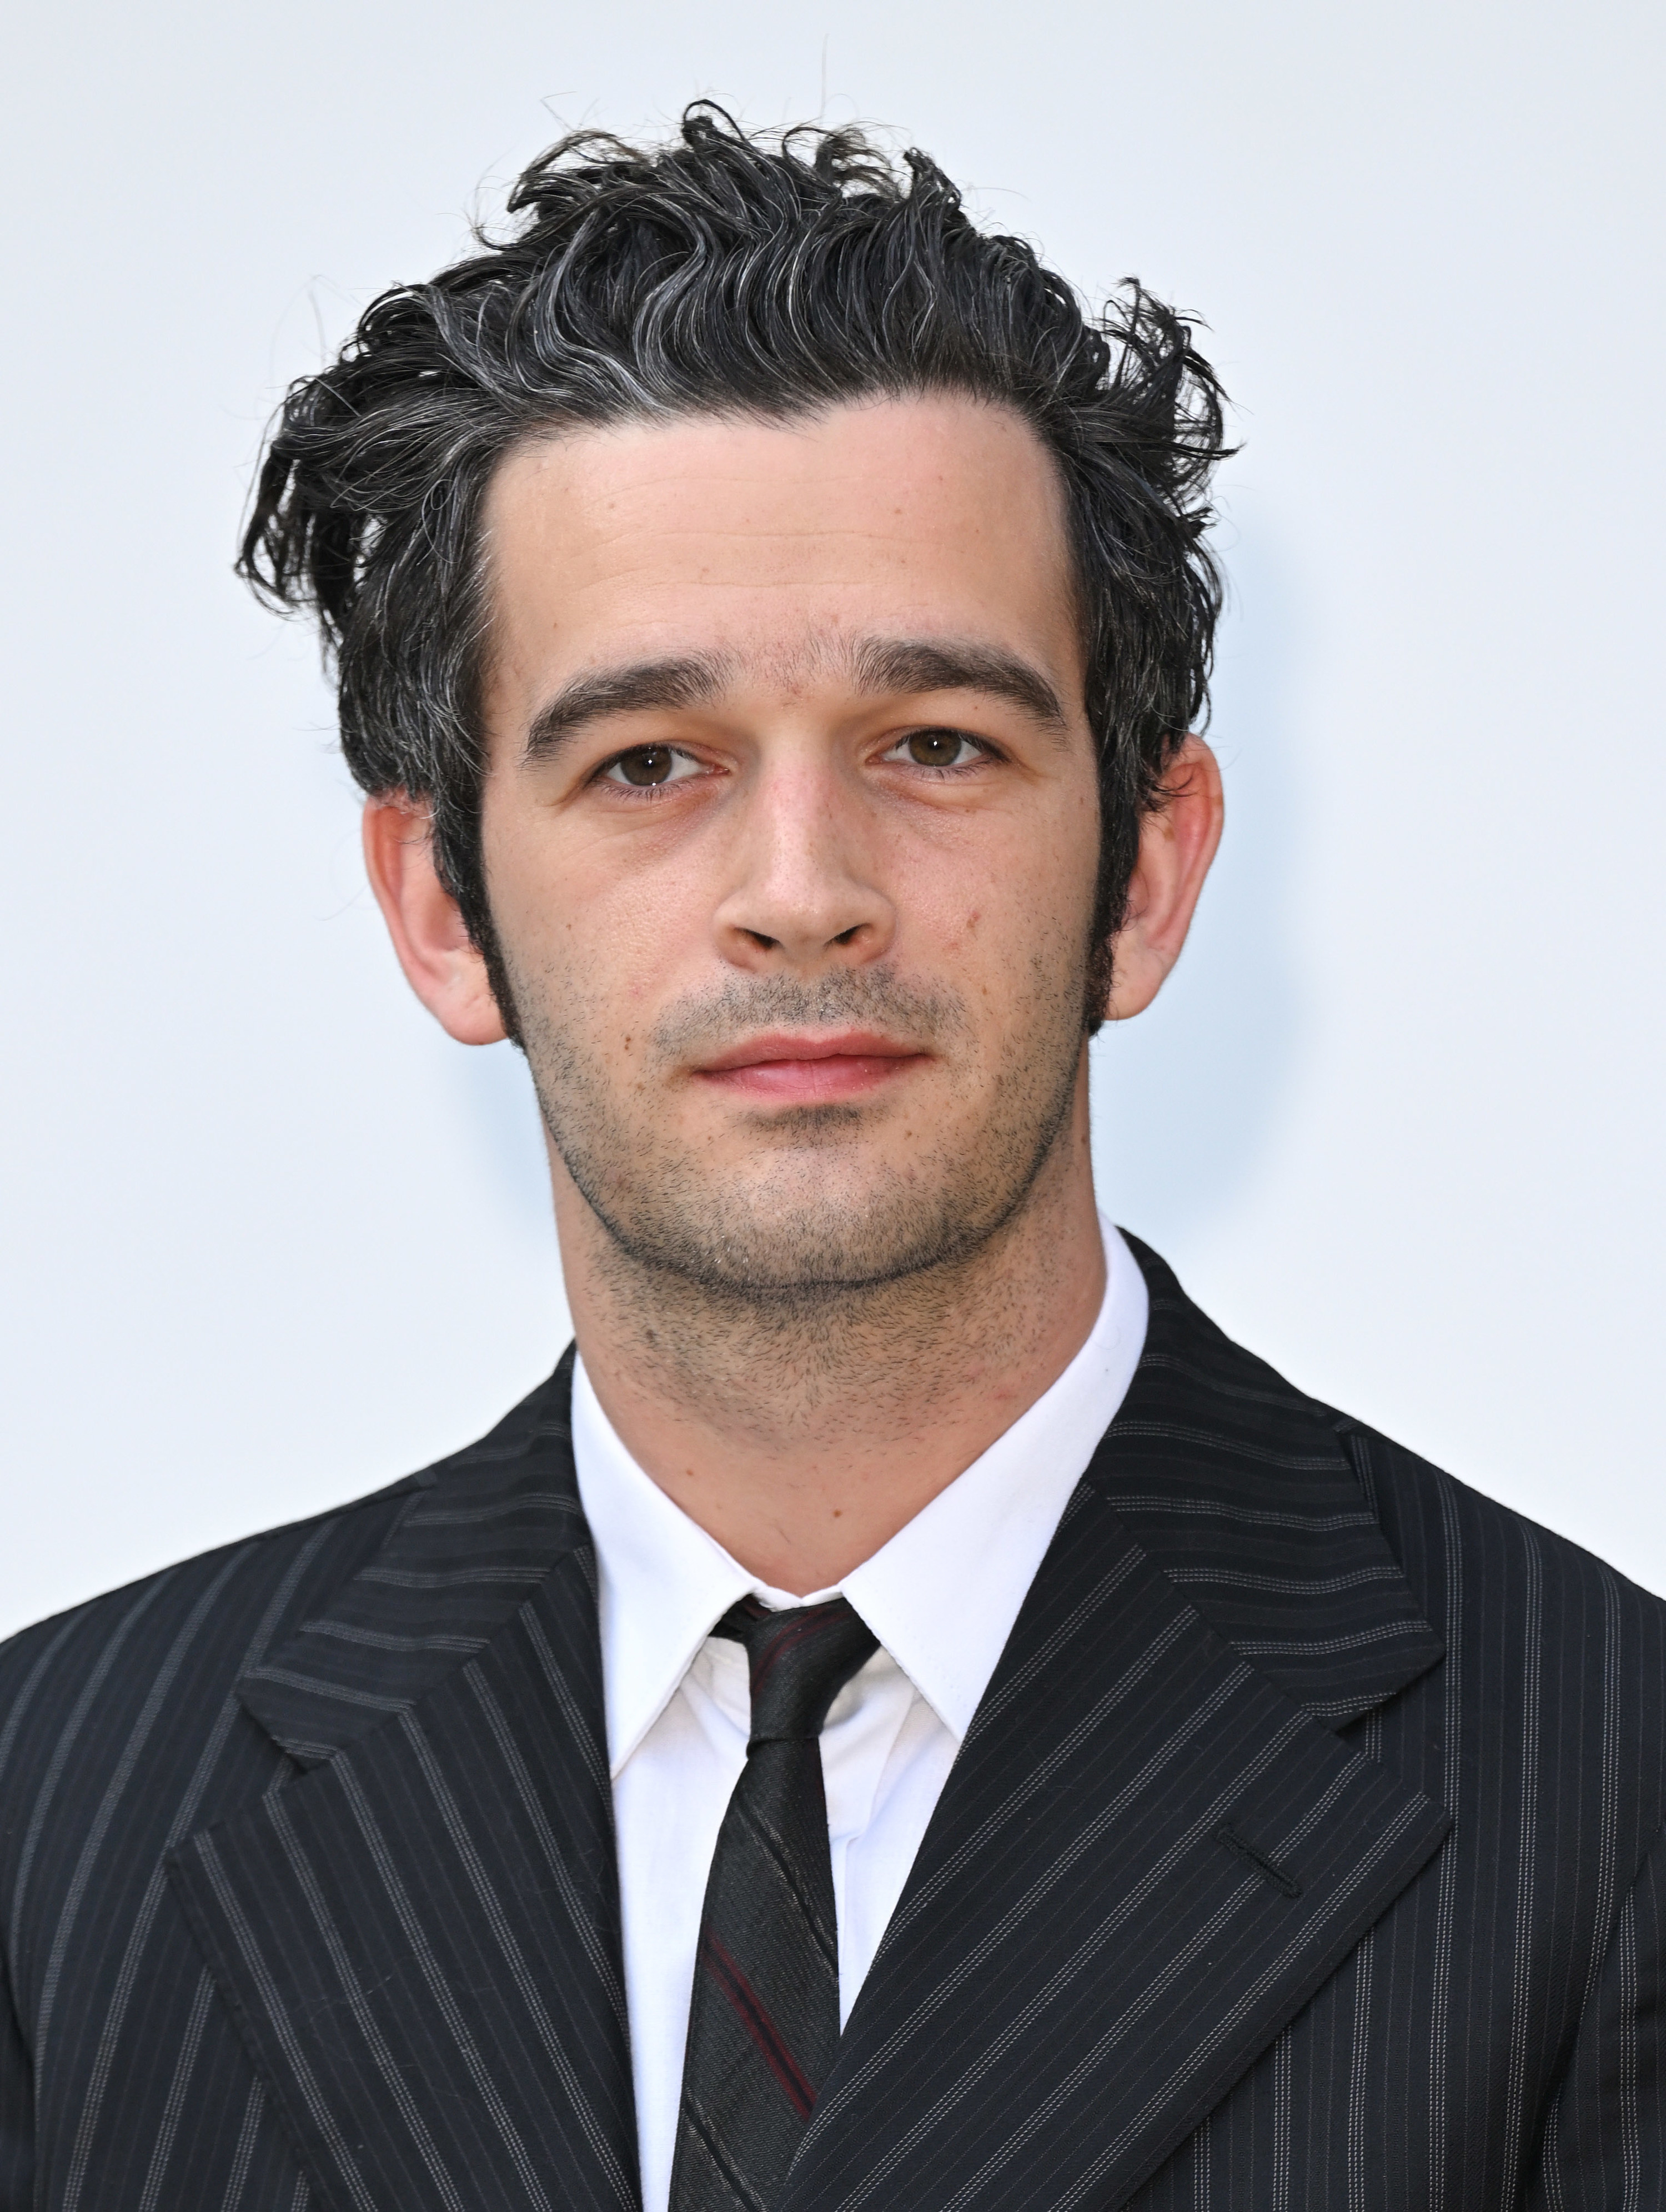 Matty in a suit and tie